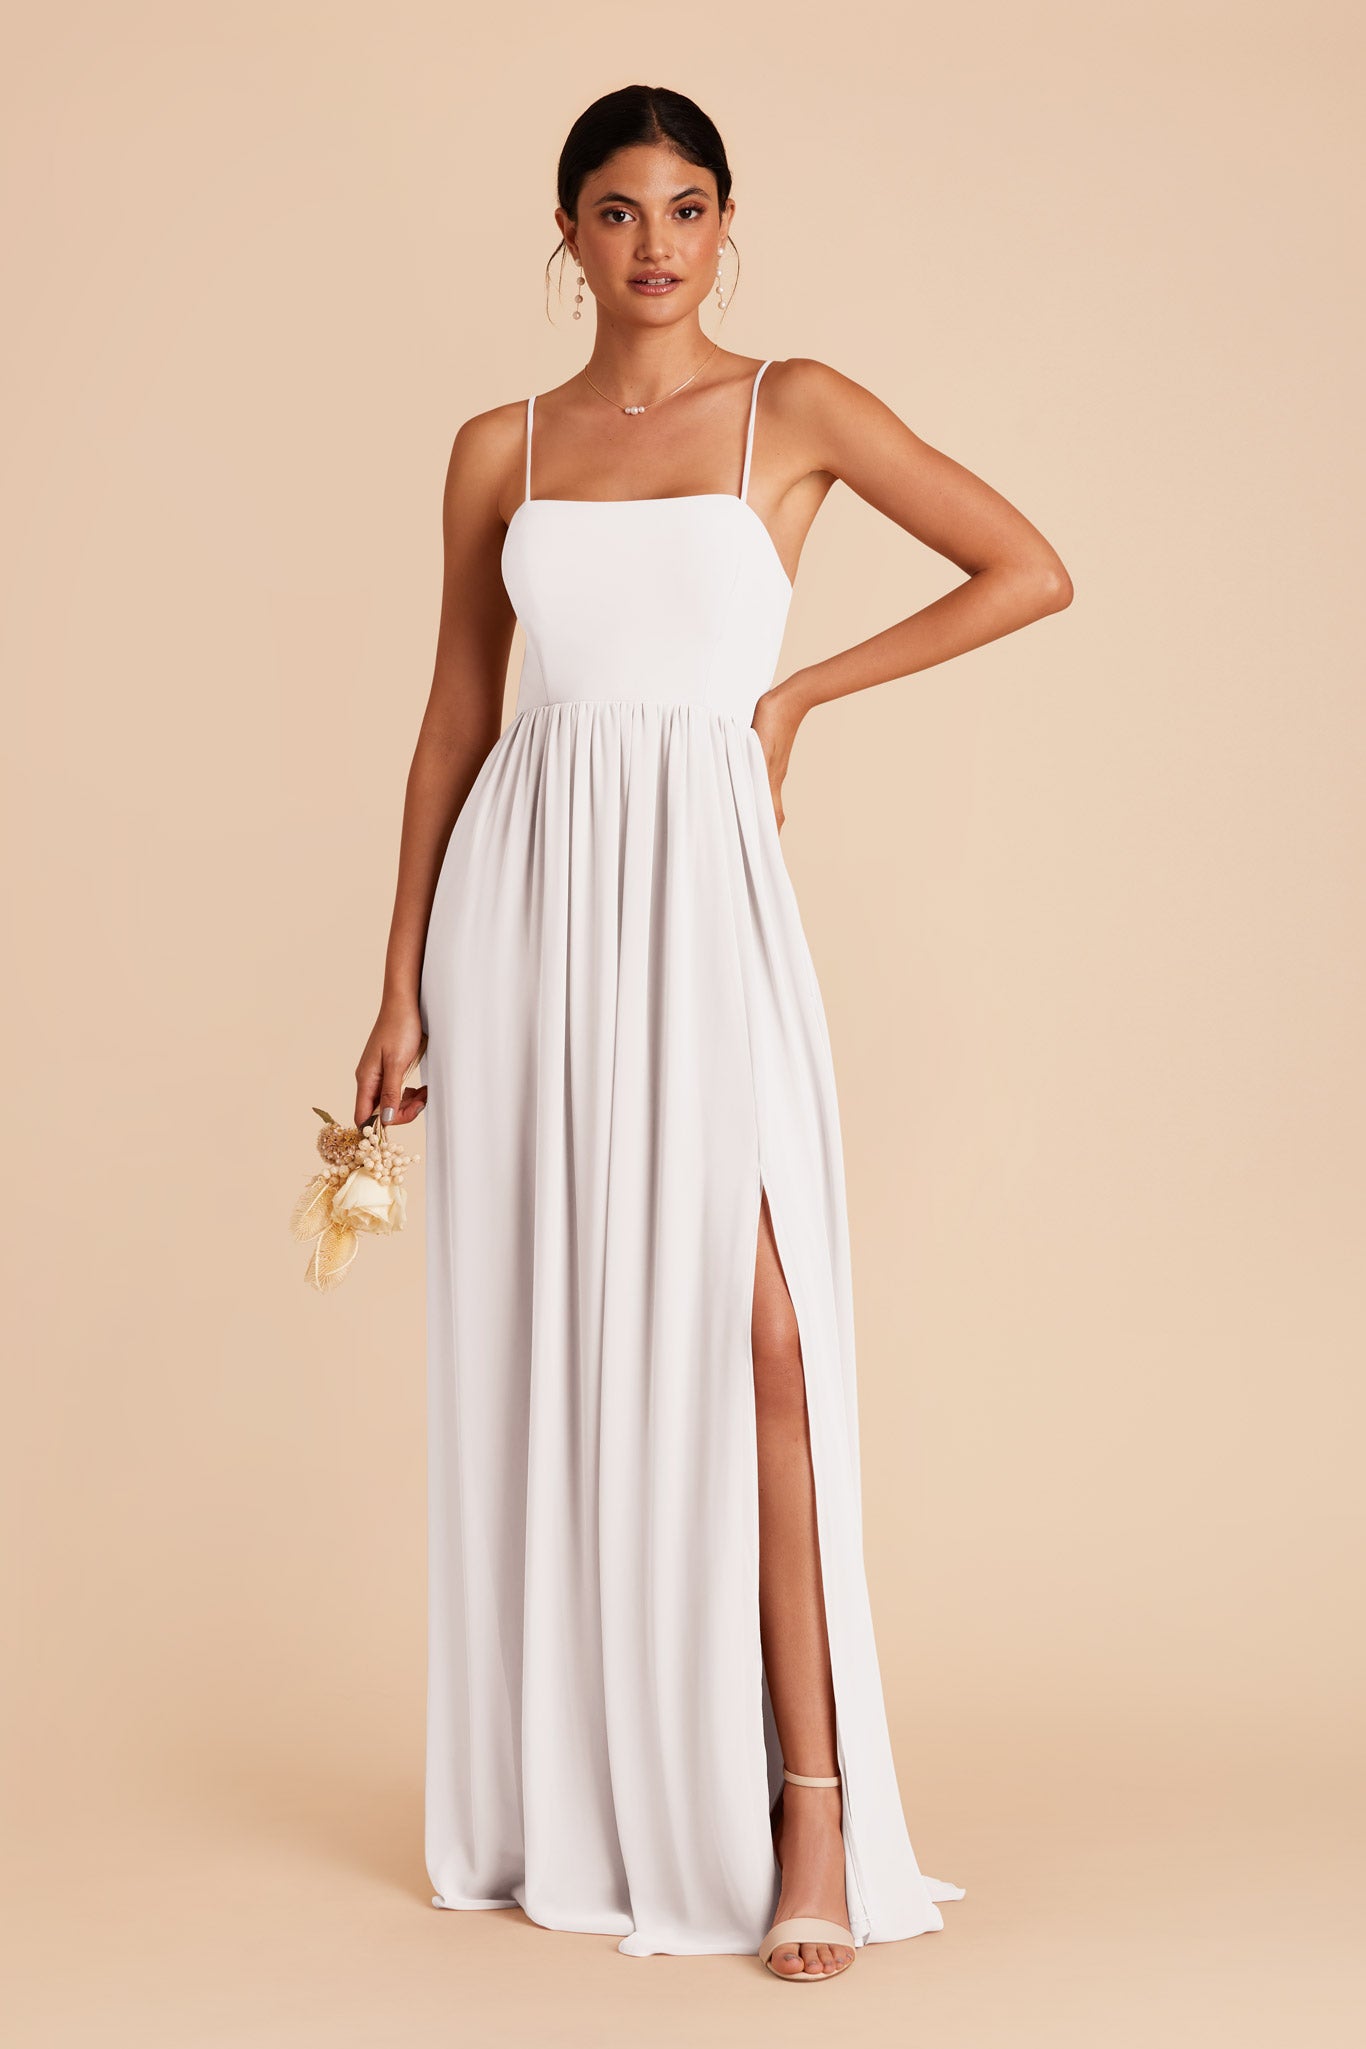 White August Convertible Dress by Birdy Grey